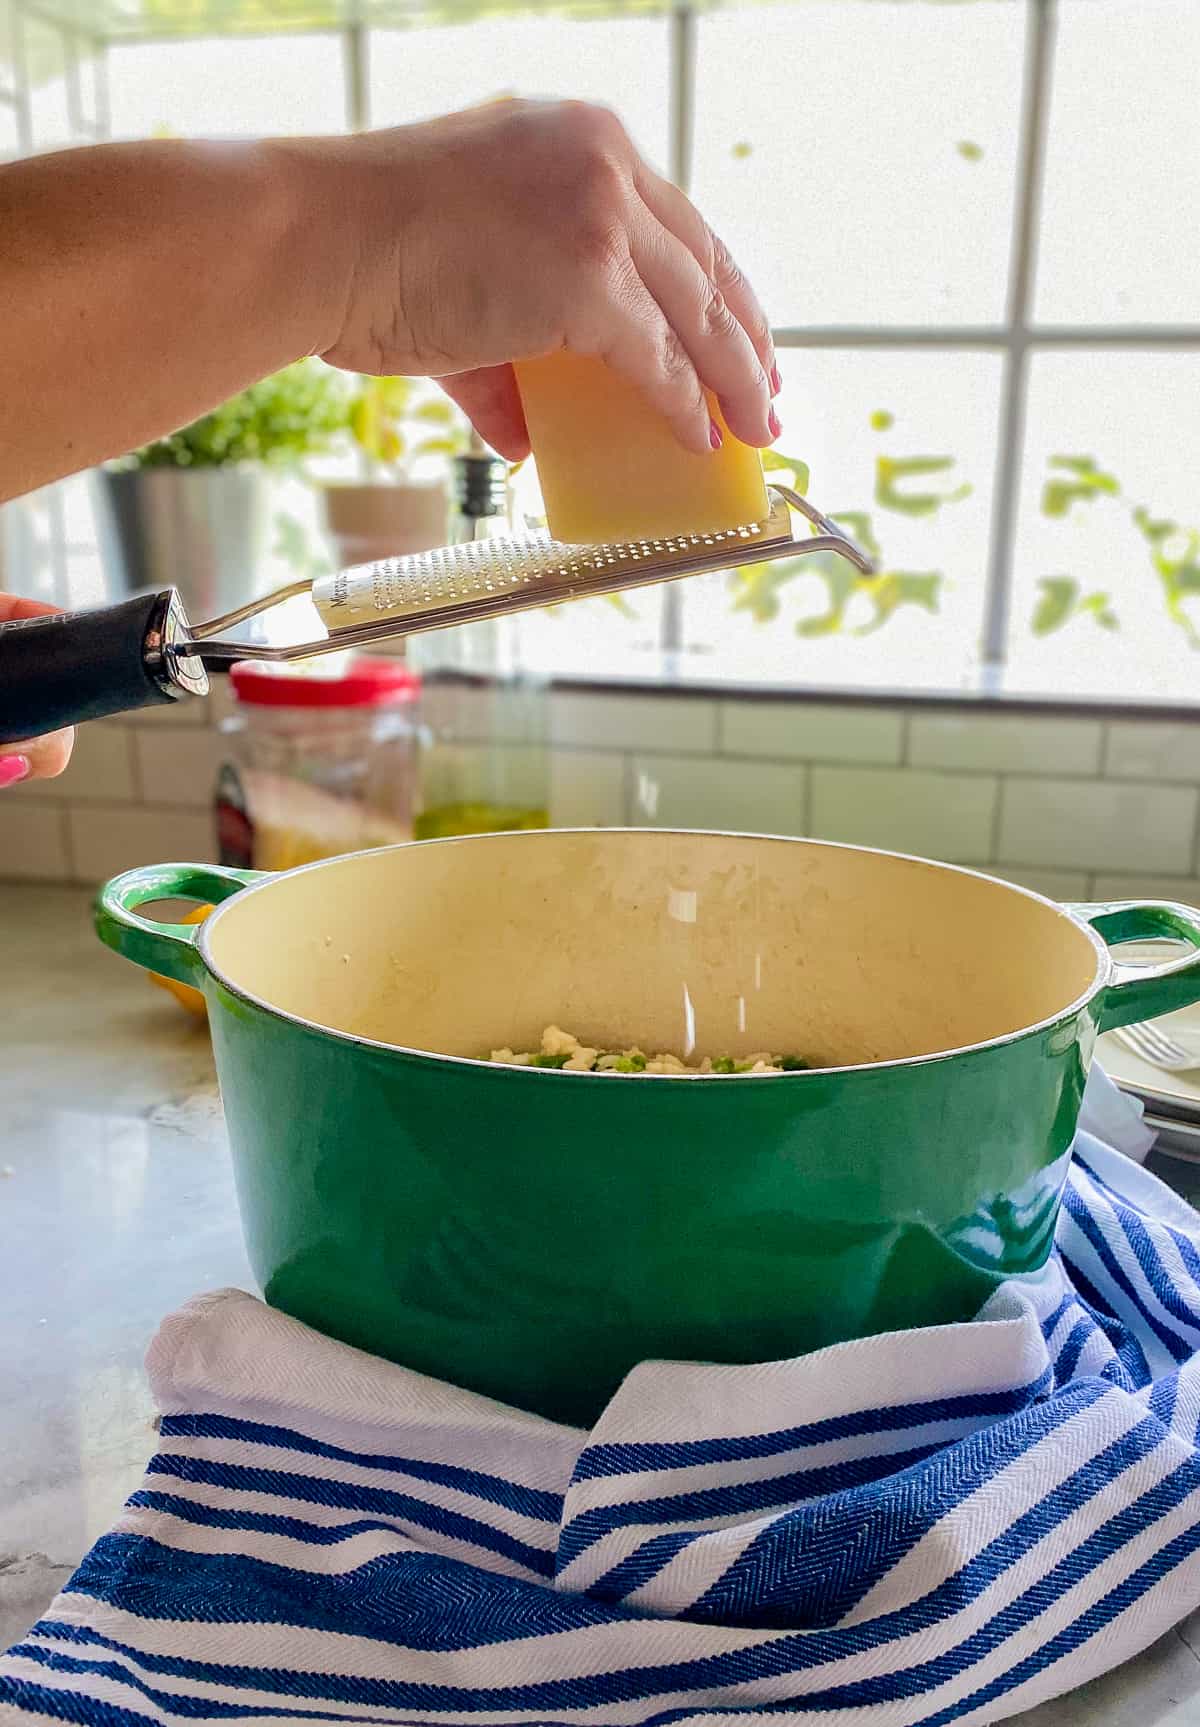 Hand grating block of cheese over a green pot.